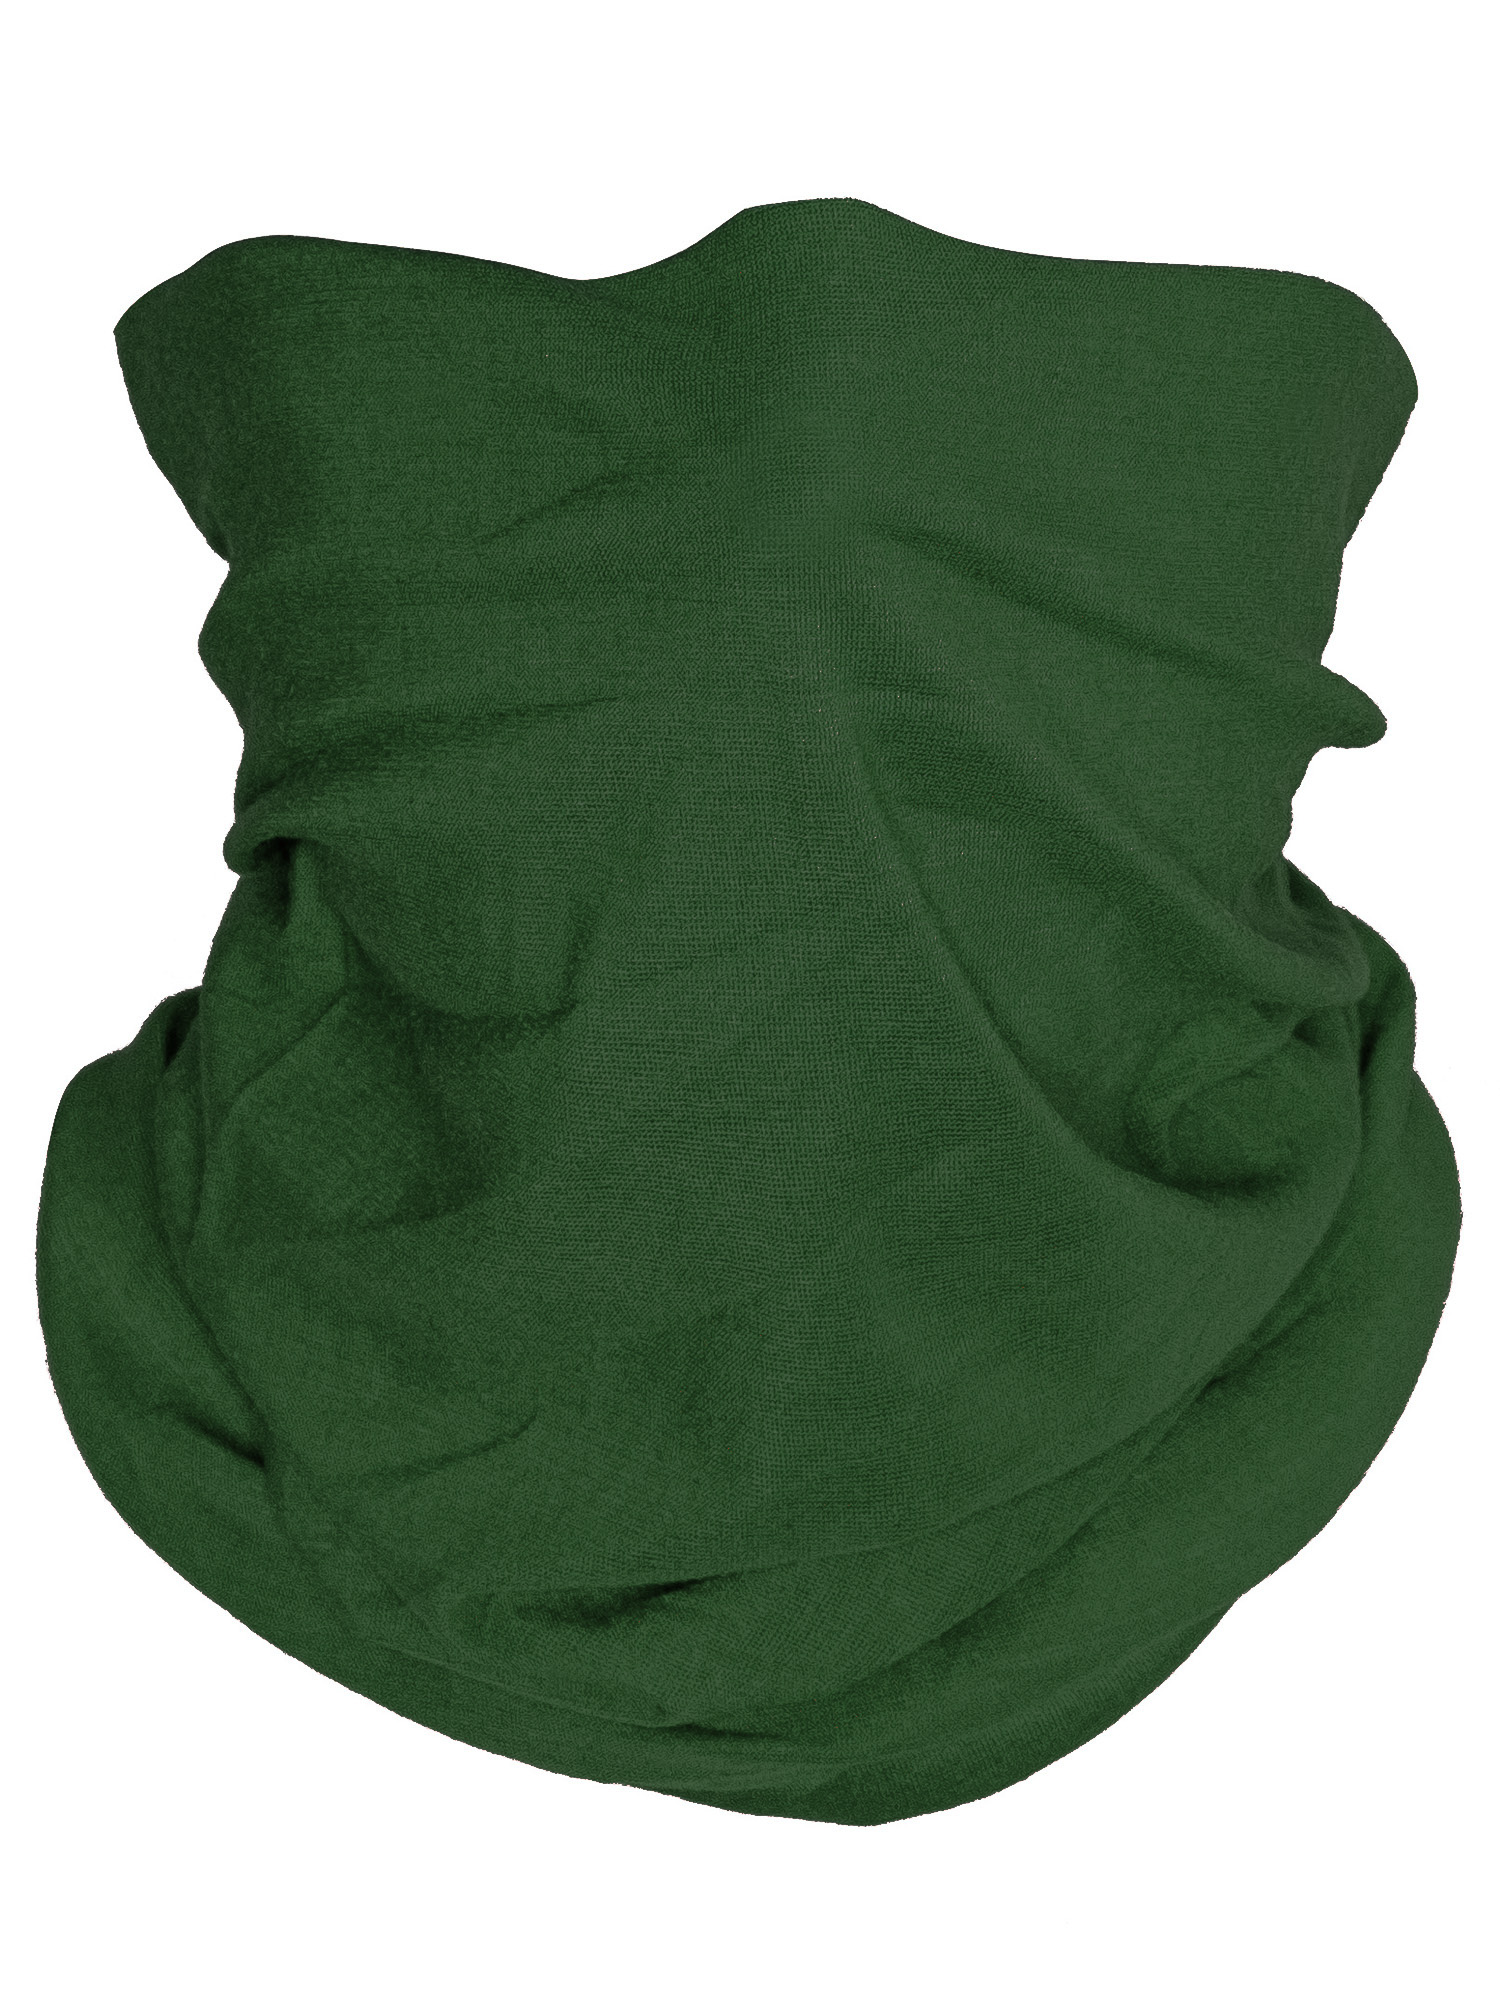 Top Headwear Multifunctional Face Covering Neck Gaiter Scarf - Dark Green - image 1 of 2